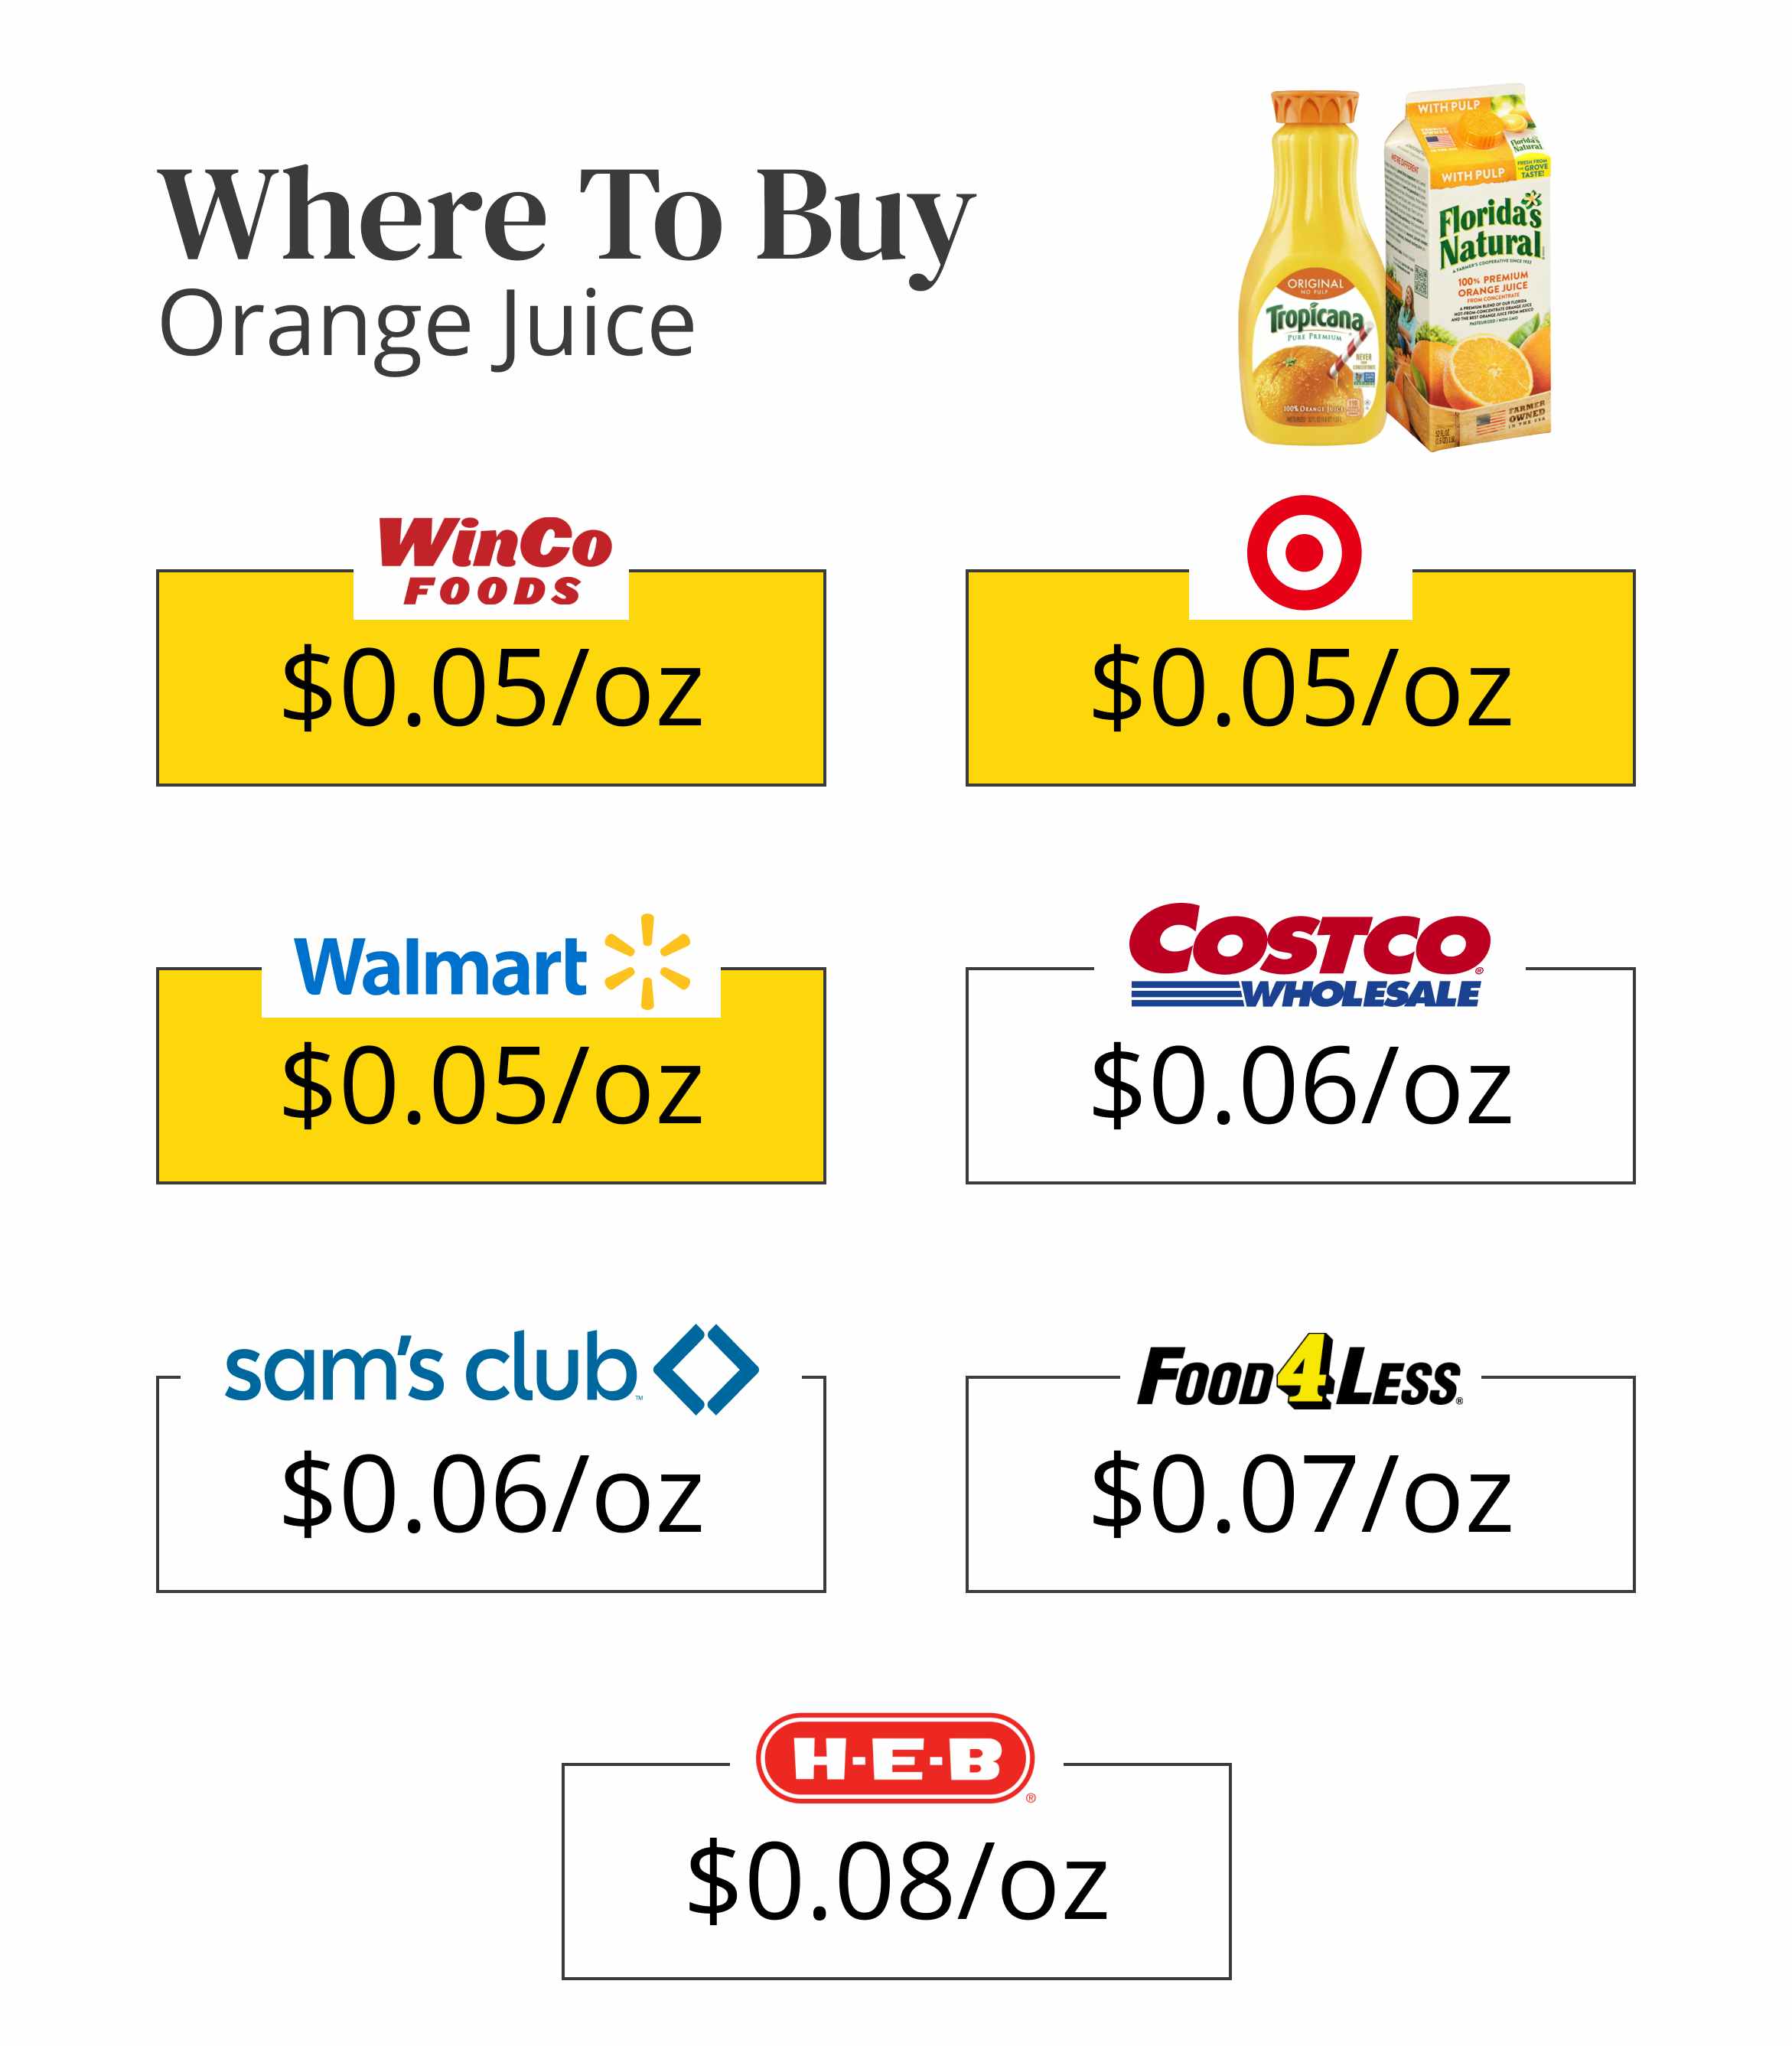 https://prod-cdn-thekrazycouponlady.imgix.net/wp-content/uploads/2023/04/where-to-buy-orange-juice-graphic-1681404844-1681404844.png?auto=format&fit=fill&q=25